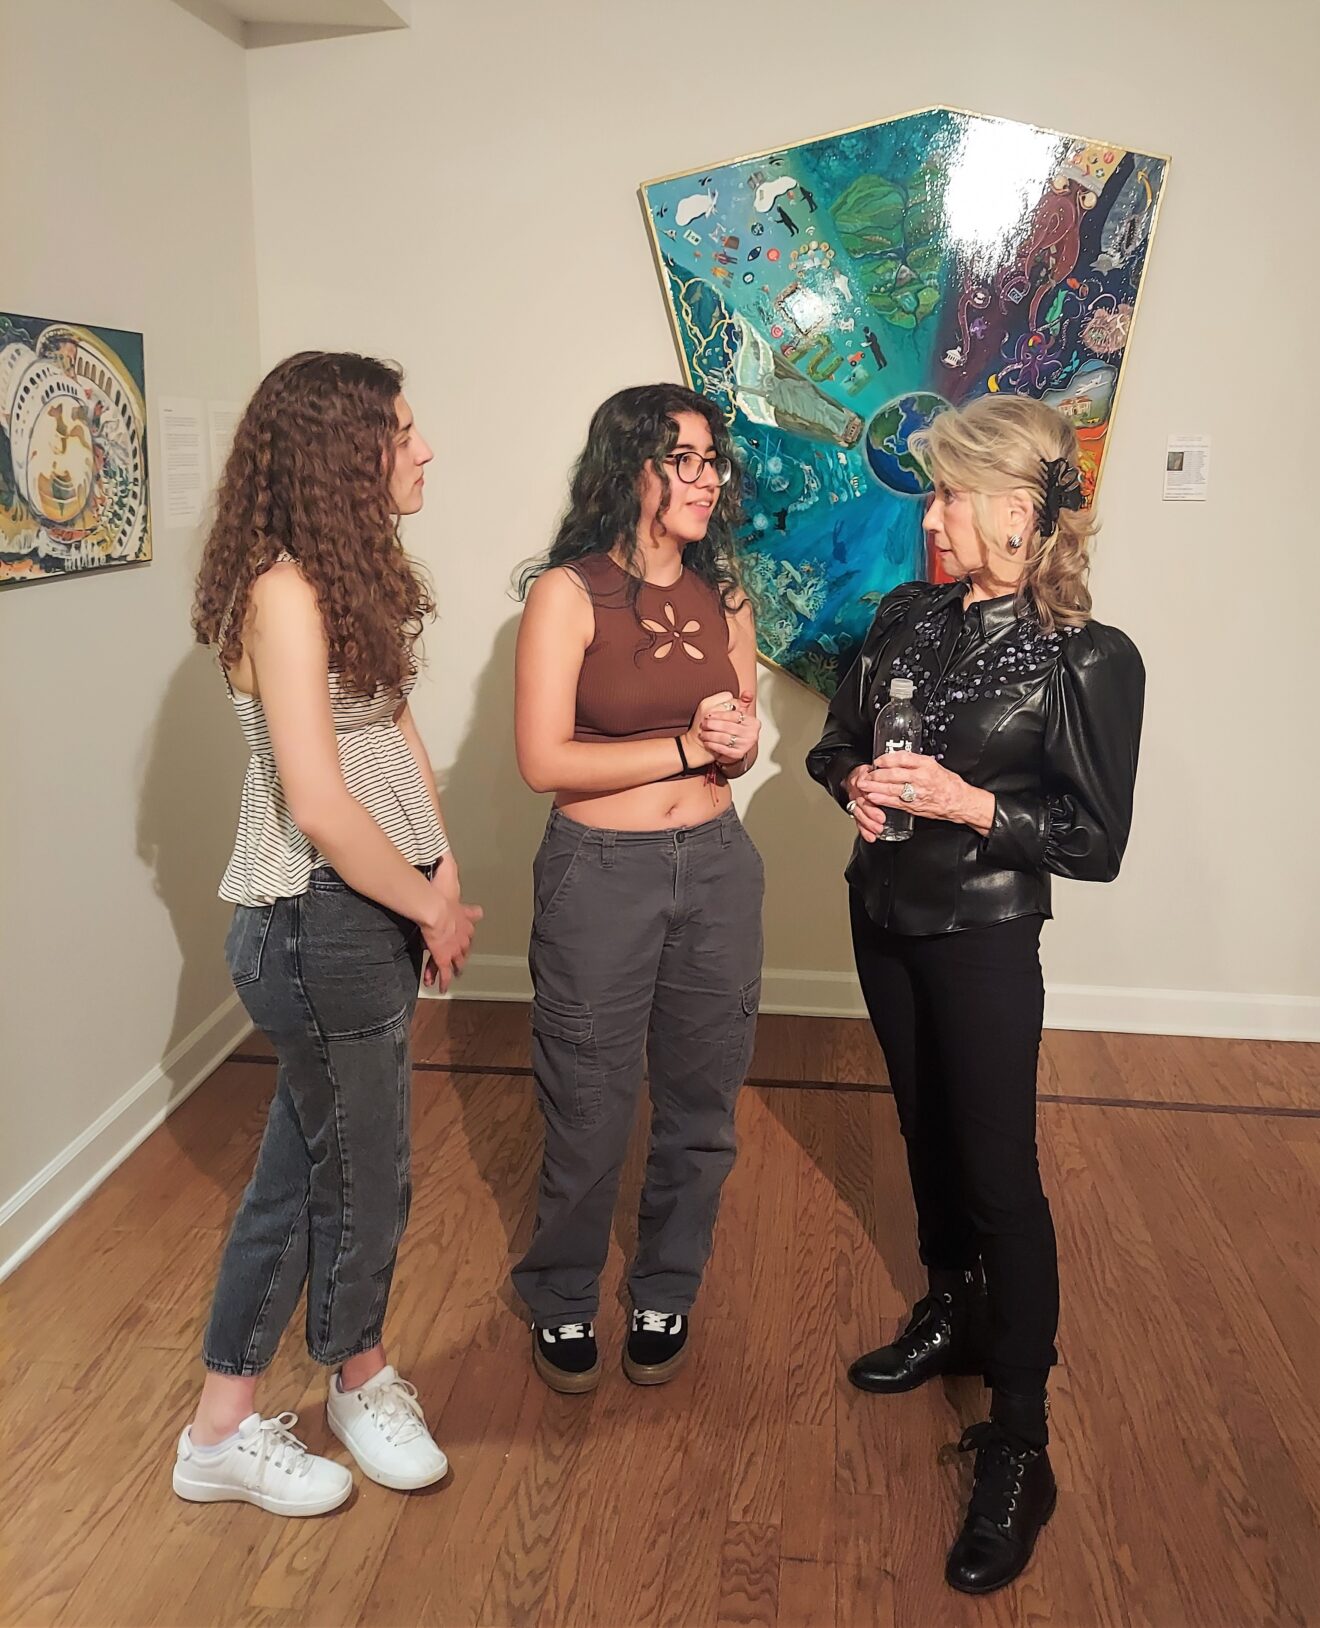 Artist and advocate Ruth Westreich speaks with two biology students during the opening reception for "Creating Conscious Conversations of Consequence" exhibition.